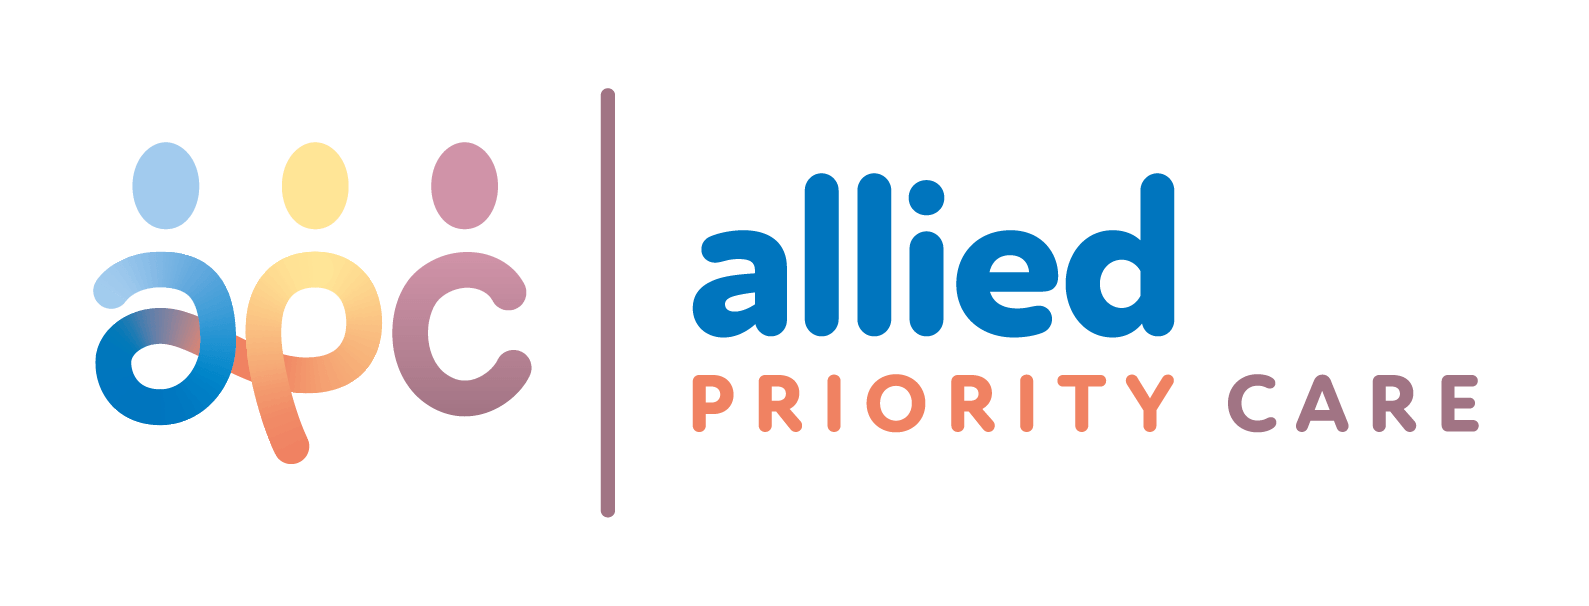 Allied Priority Care - NDIS Service Provider in Melbourne and Victoria